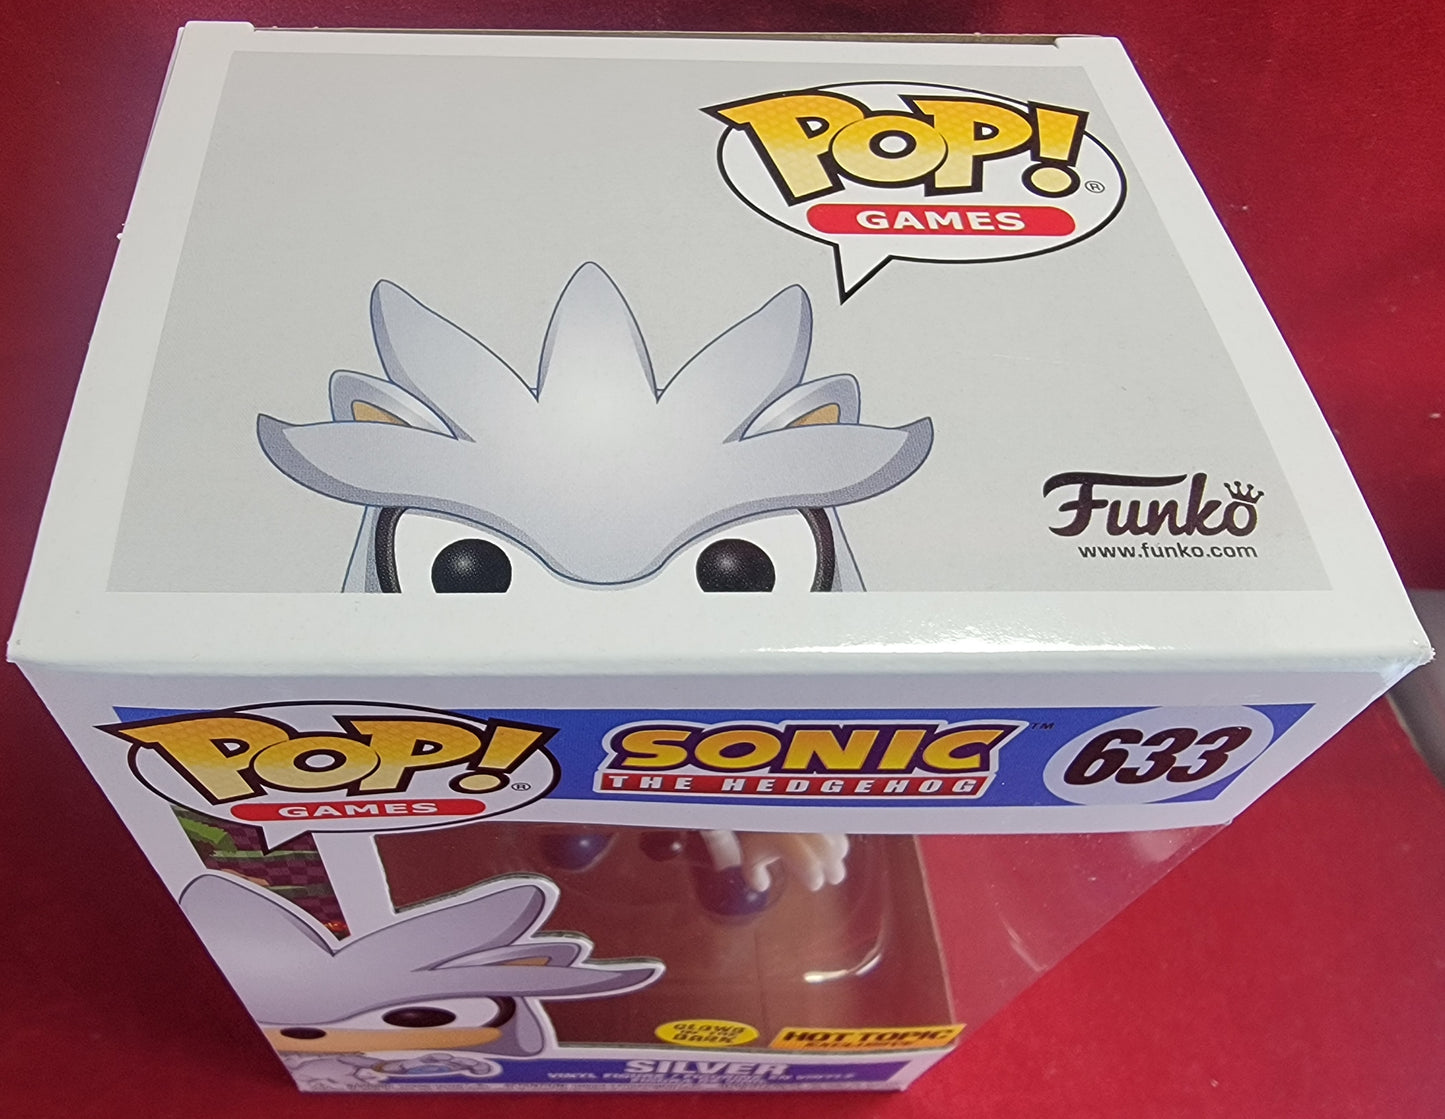 Silver hot topic exclusive funko # 633 (nib)
With pop protector